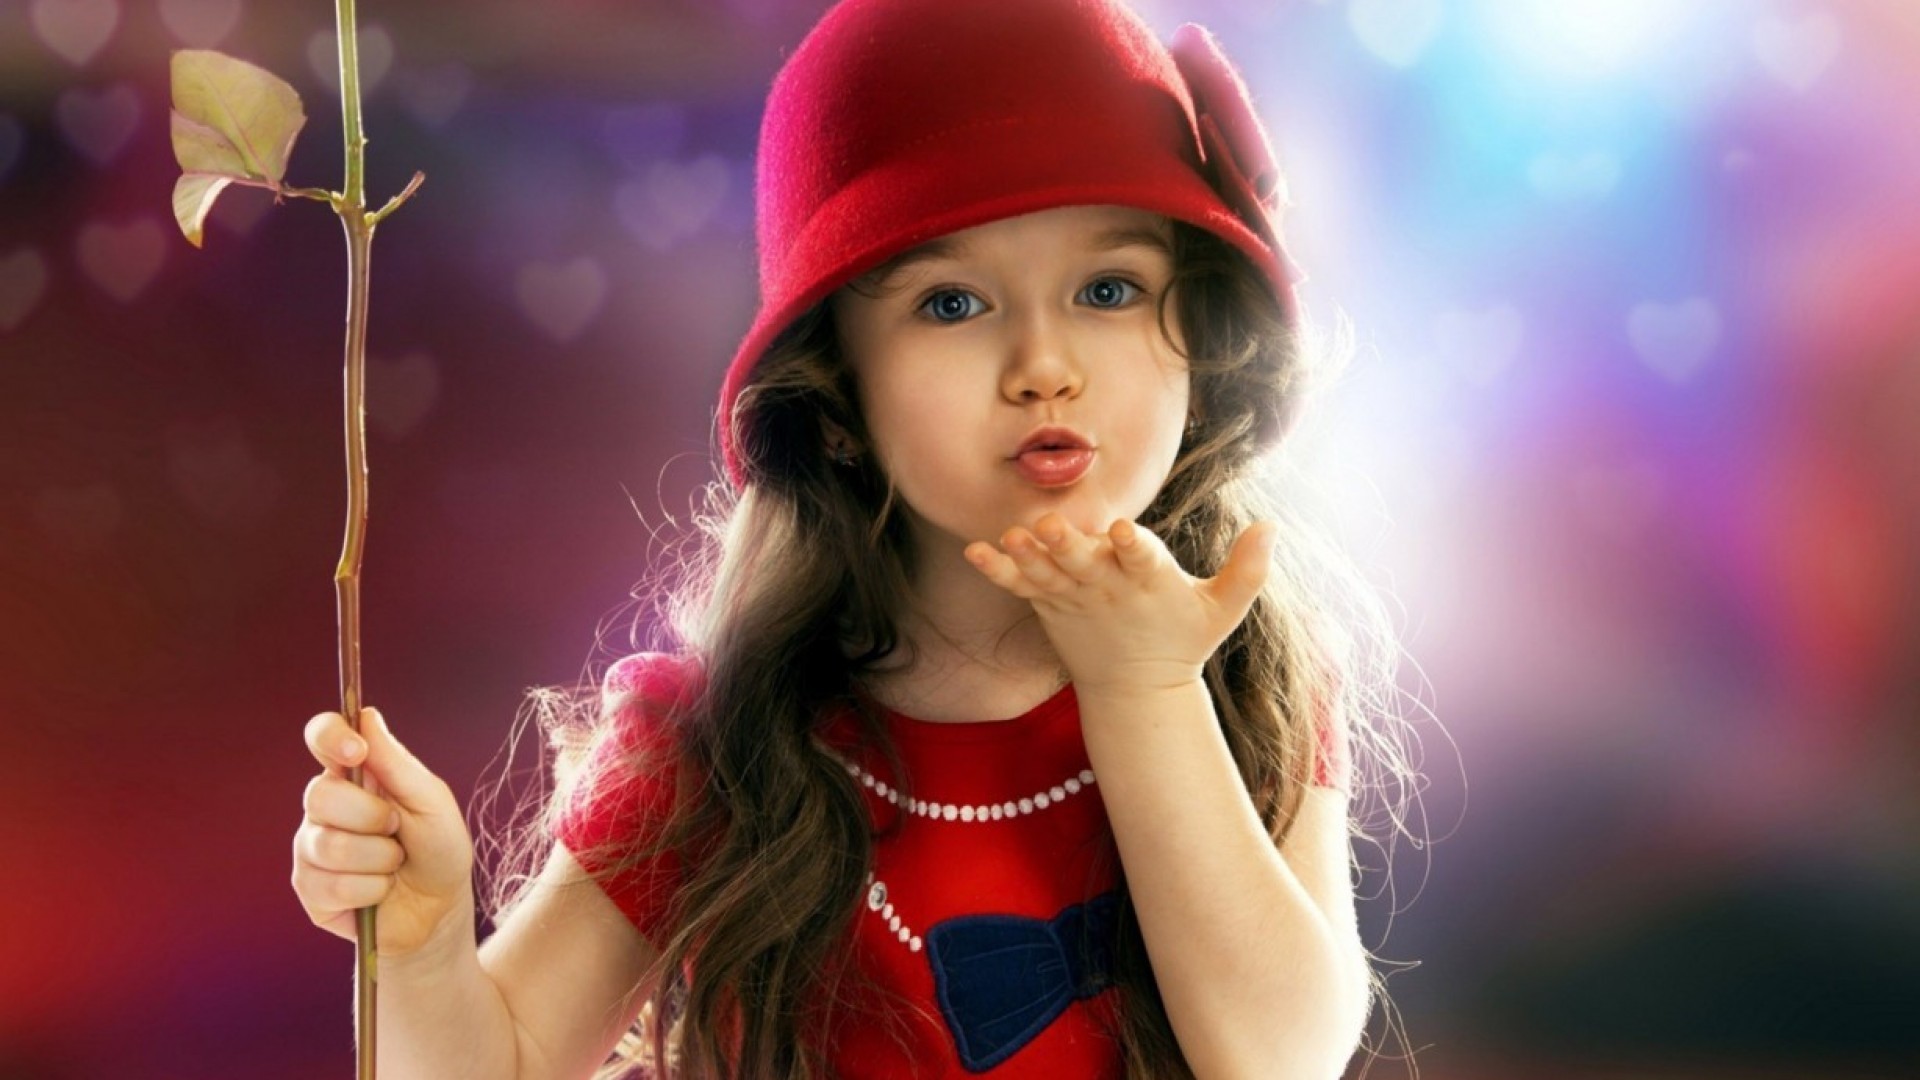 1920x1080 undefined Baby Girl Images Wallpapers (39 Wallpapers) | Adorable Wallpapers